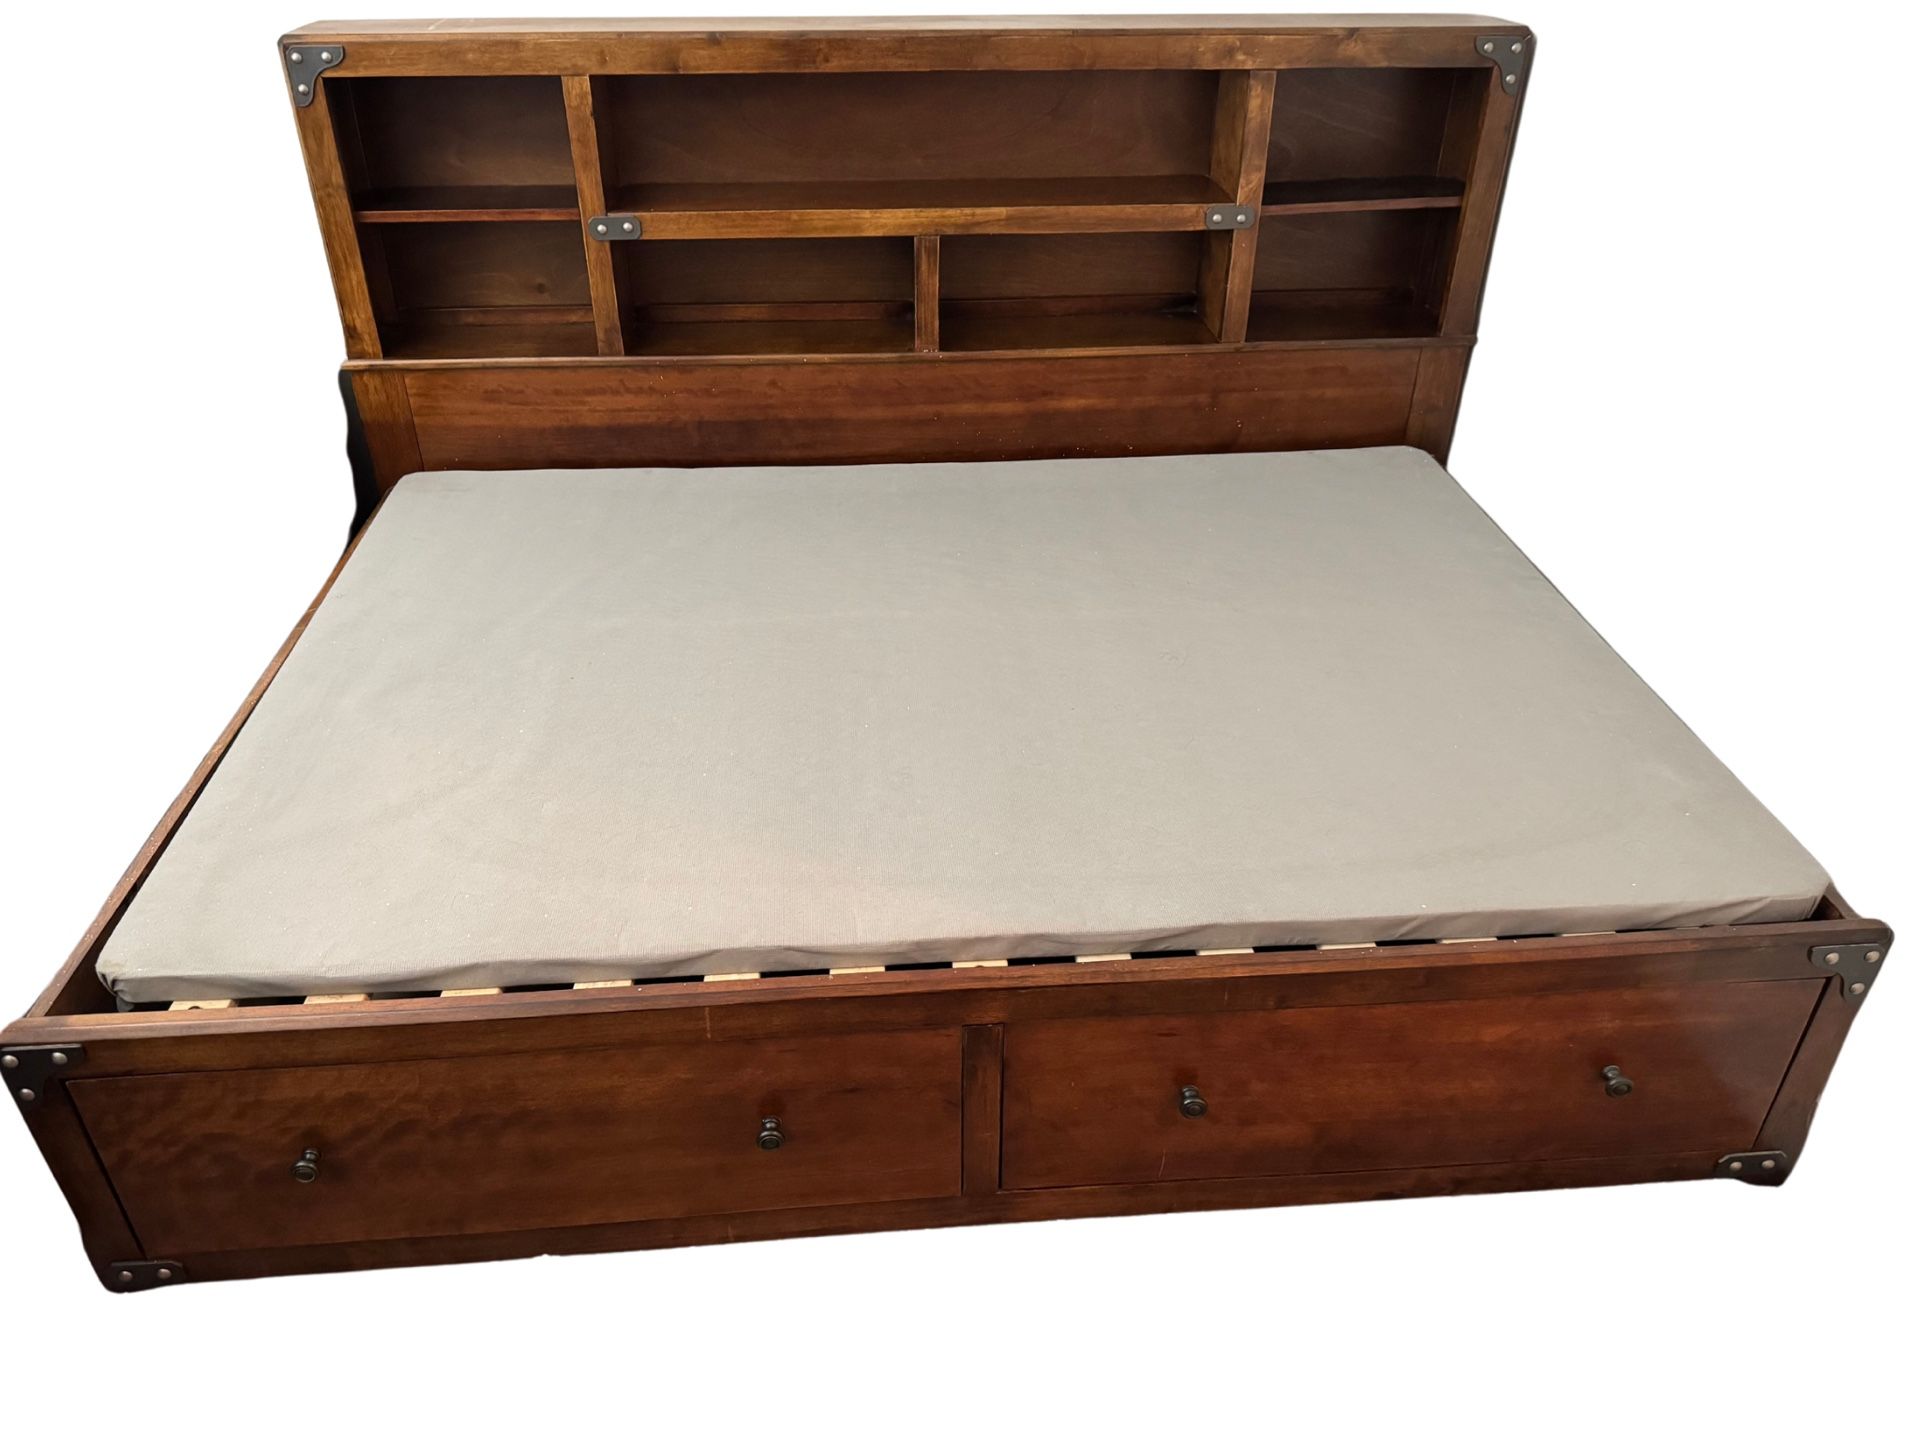 Full Bed Frame - Dark Brown Wood w/ Shelves And Drawers